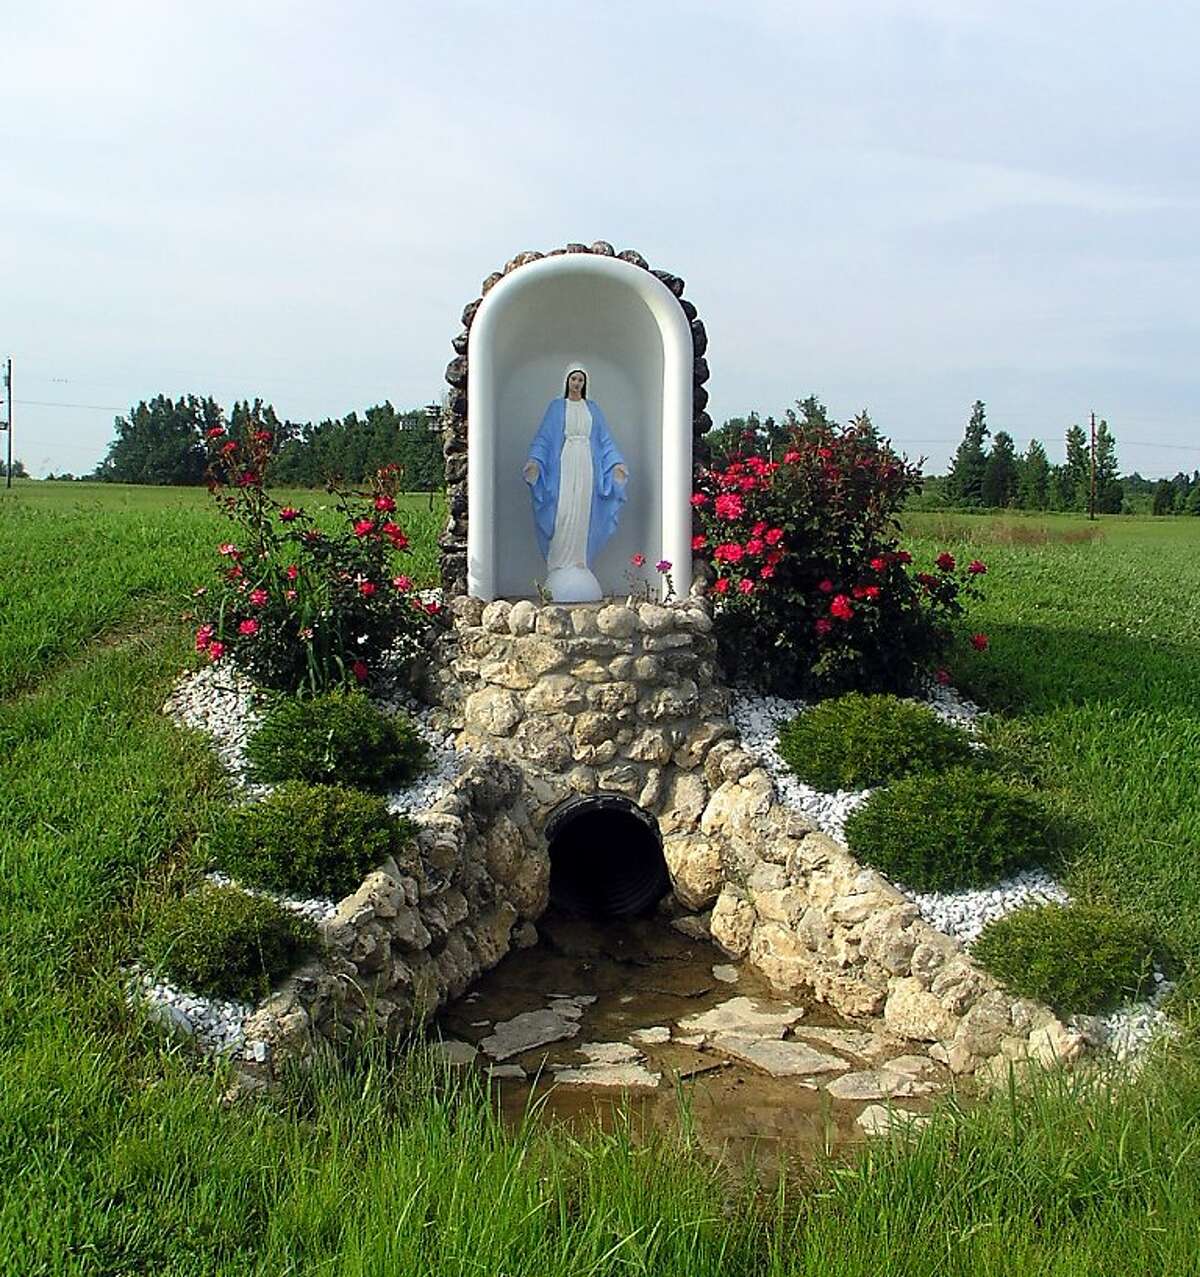 A Bathtub Mary directly across the road from Maker's Mark Distillery in Loretto, Ky.